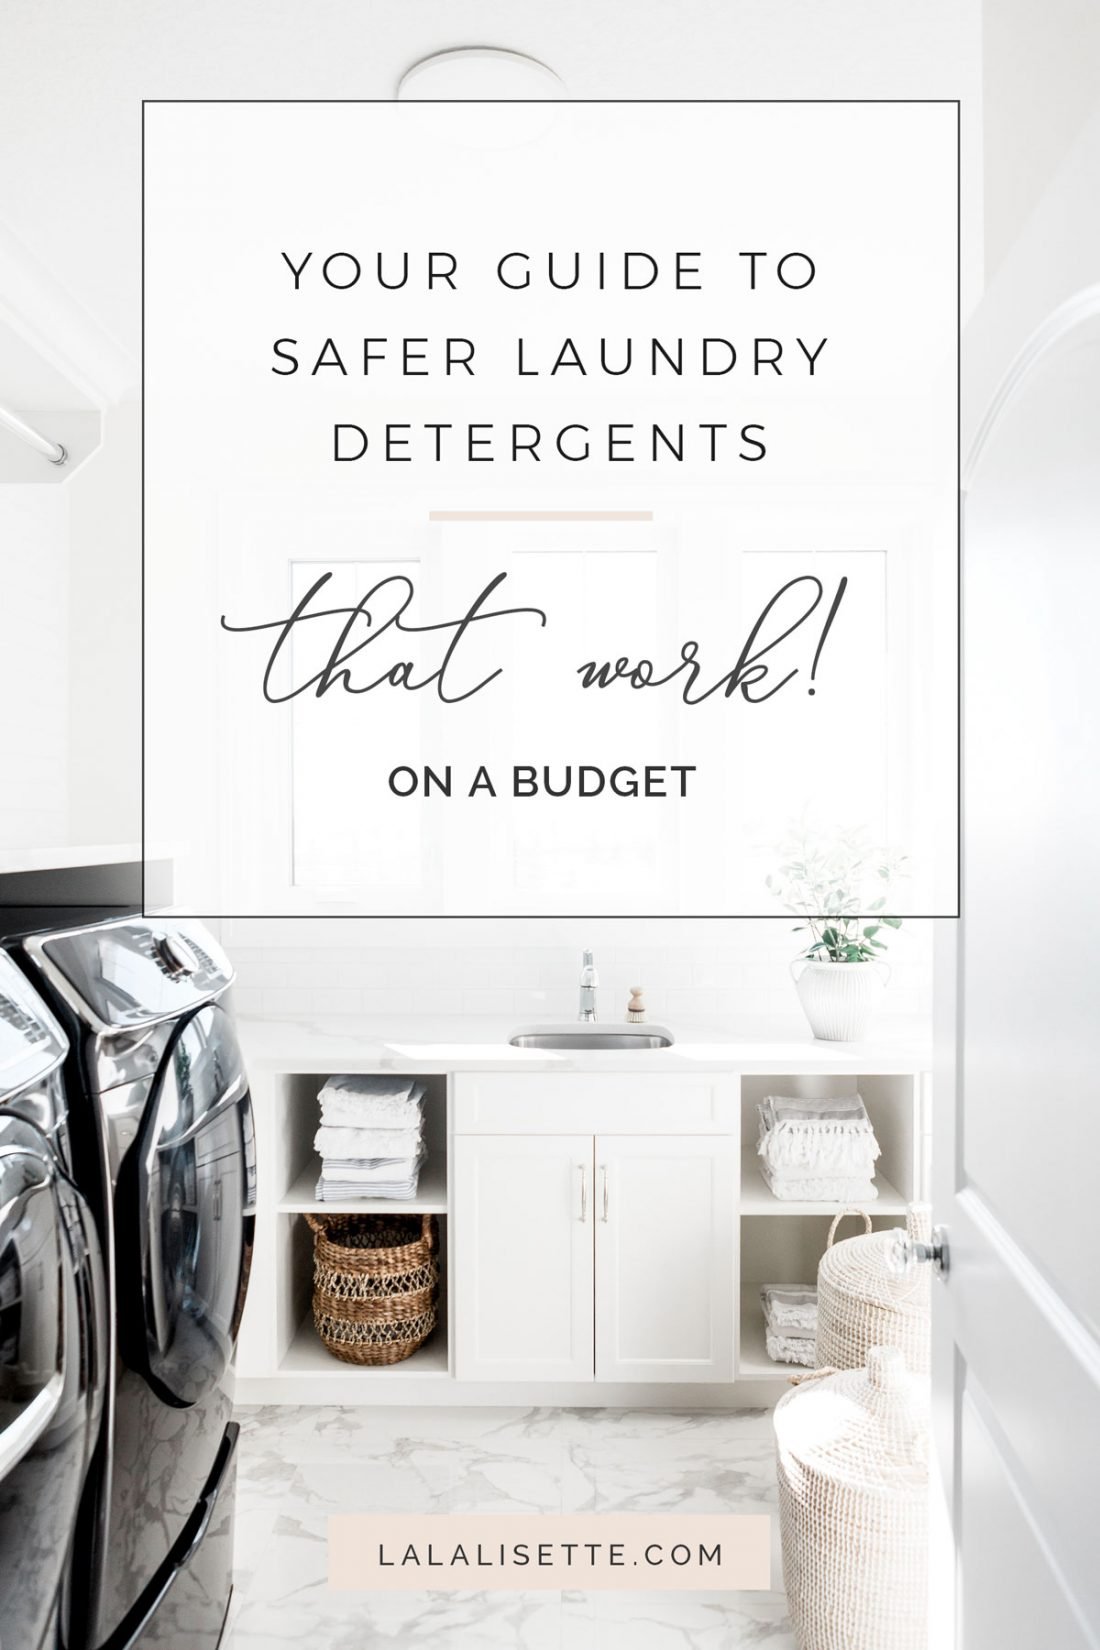 graphic of a laundry room with text: Your Guide to Safer Laundry Detergents that work! on a Budget and www.lalalisette.com